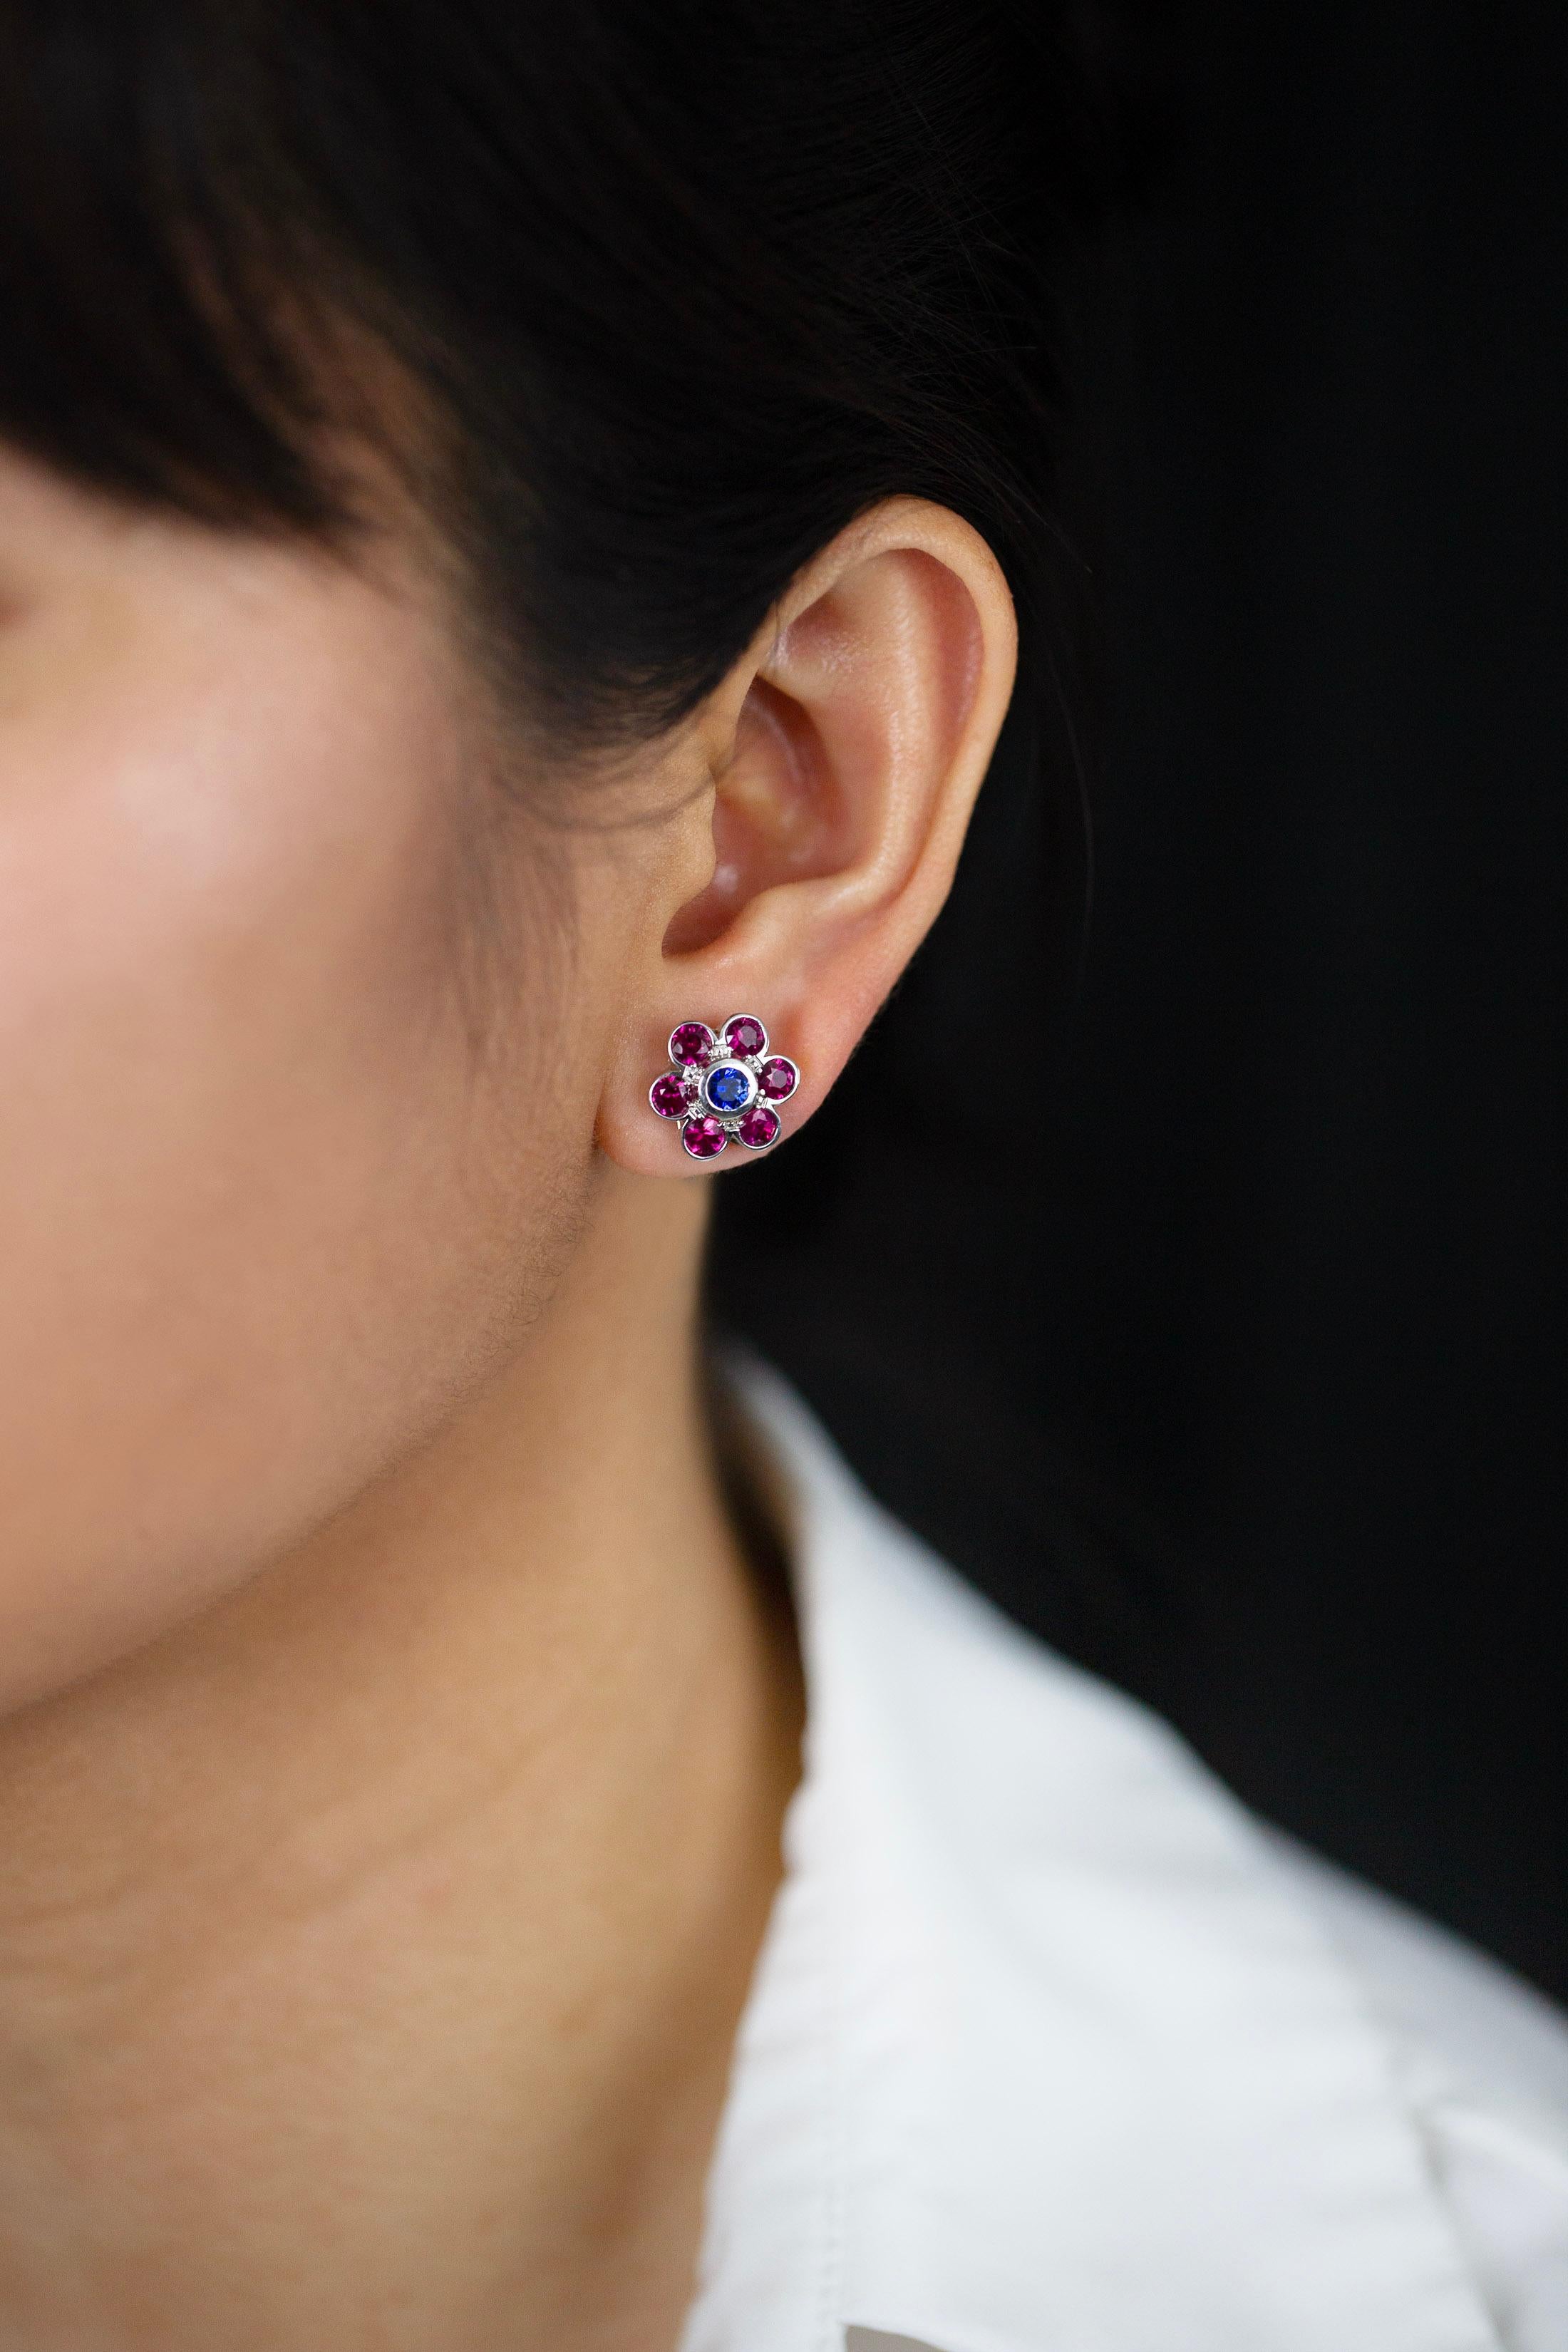 A fashionable pair of stud earrings showcasing a brilliant round cut bezel set blue sapphire in the center weighing 0.55 carats total. Surrounded by six brilliant round rubies weighing 2.52 carats total, arranged in a beautiful floral-motif design.